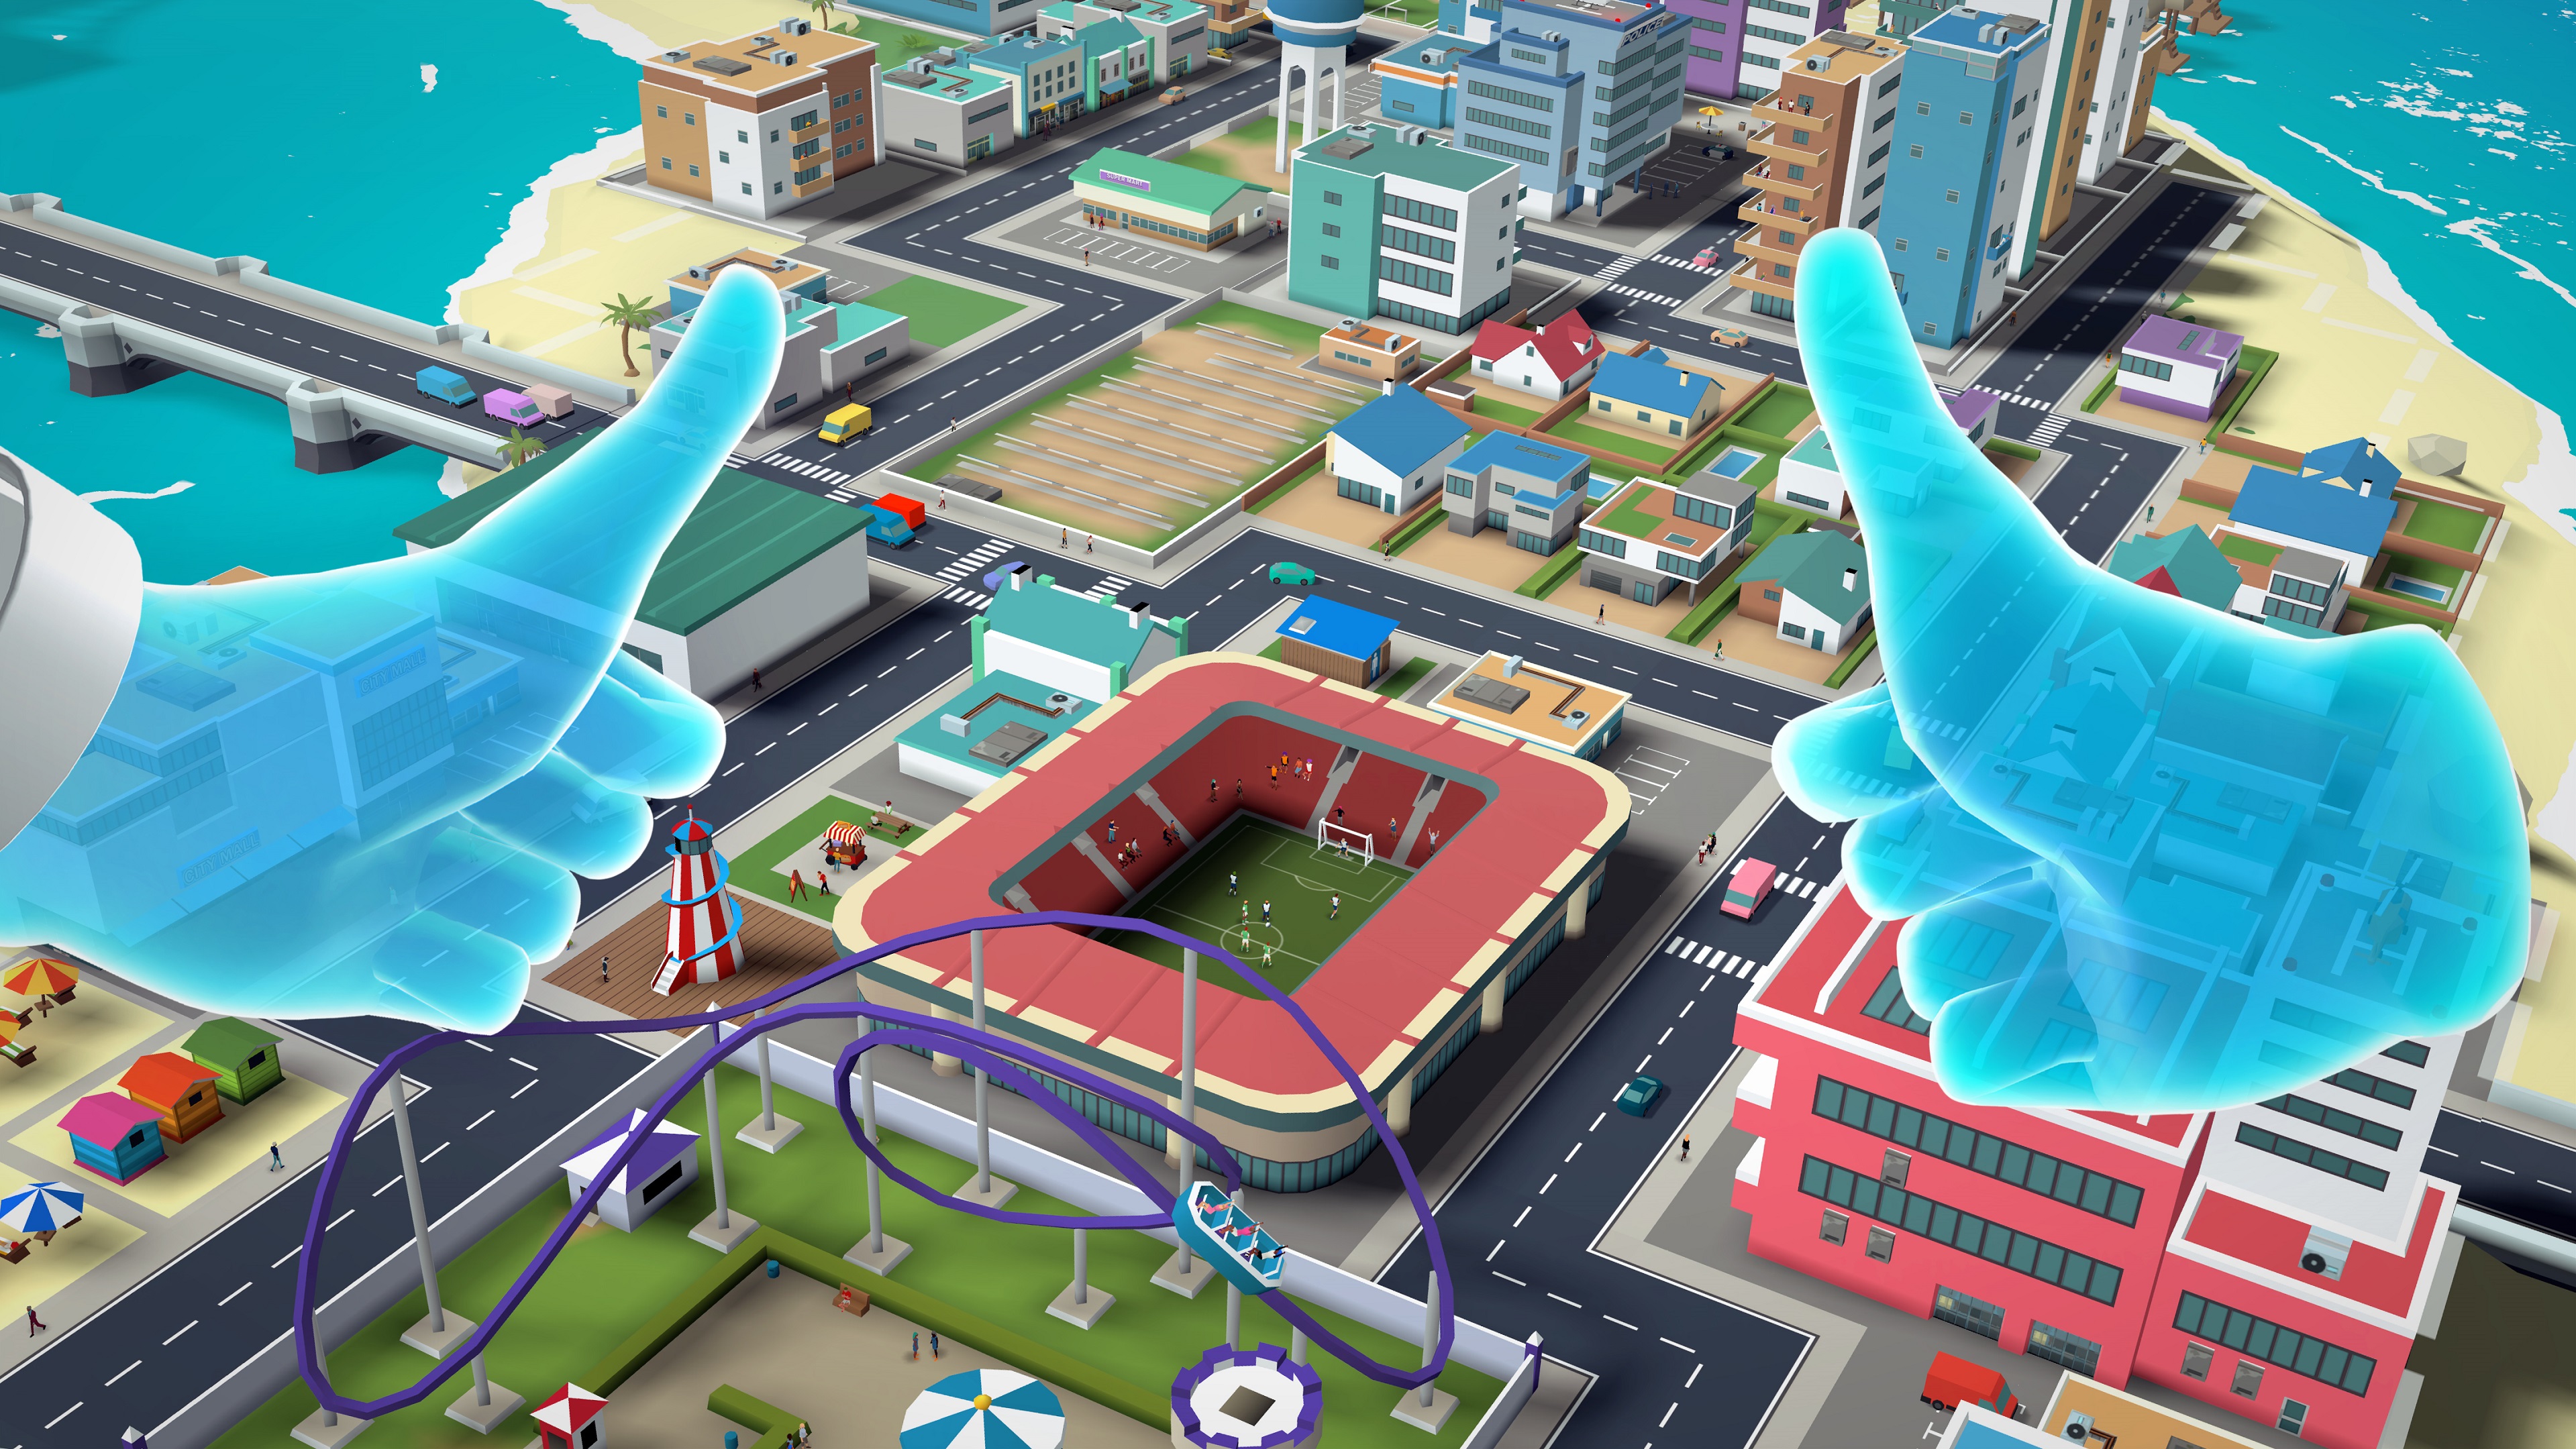 Barbecue, Soccer, Yoga: Little Cities Update brings your VR City to Life